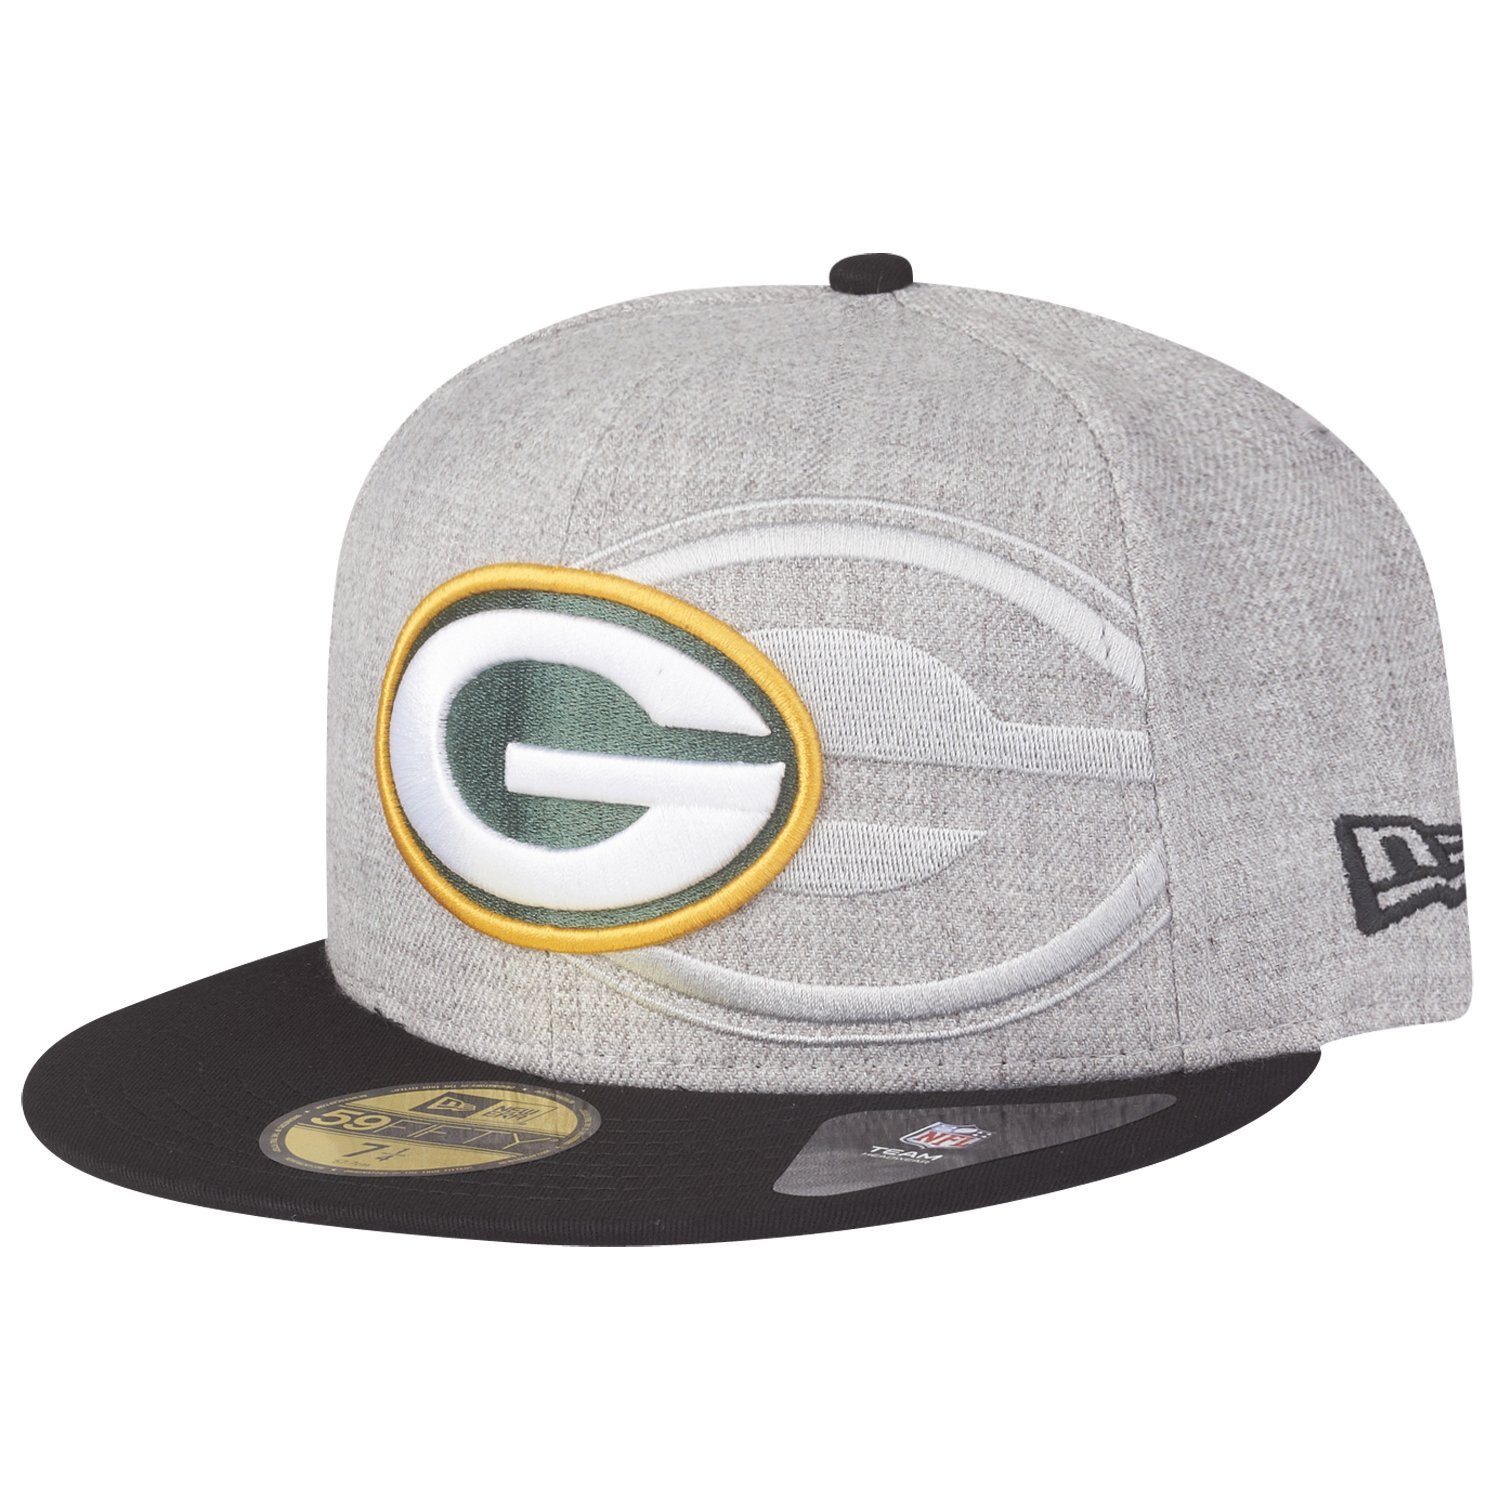 New Era Fitted Cap 59Fifty SCREENING II NFL Green Bay Packers